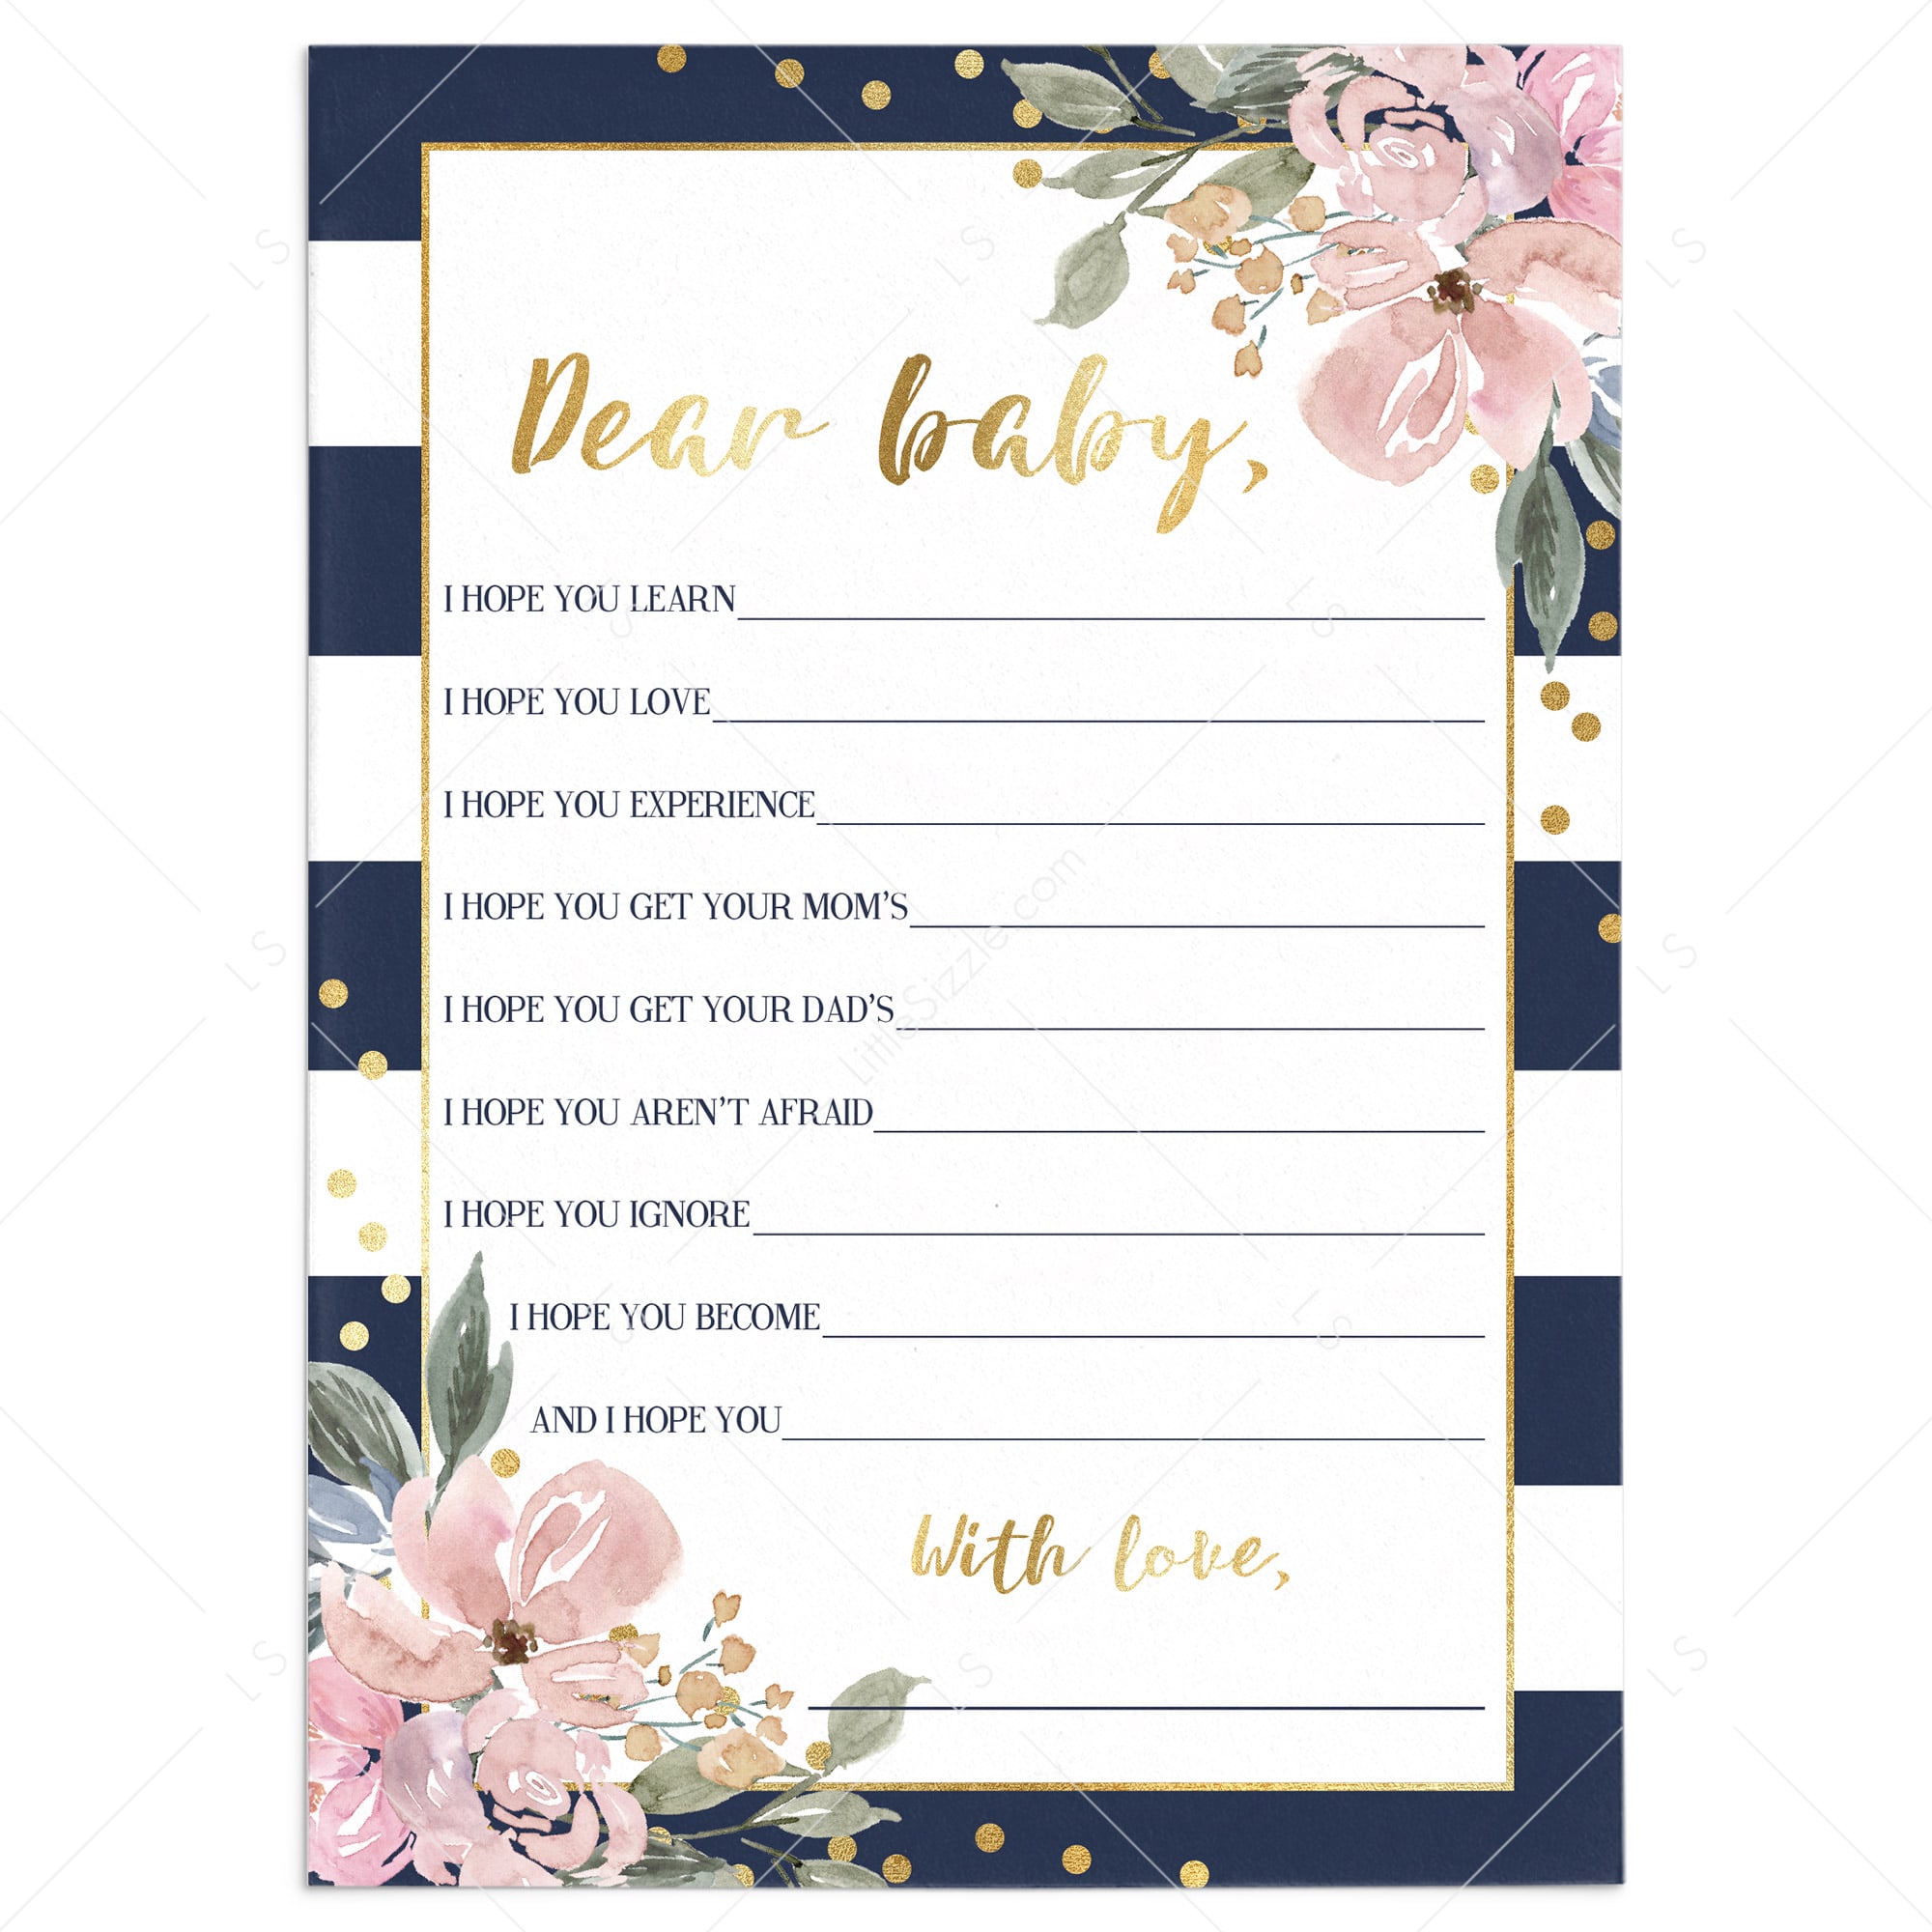 Wishes for baby game for navy and gold baby sprinkle by LittleSizzle